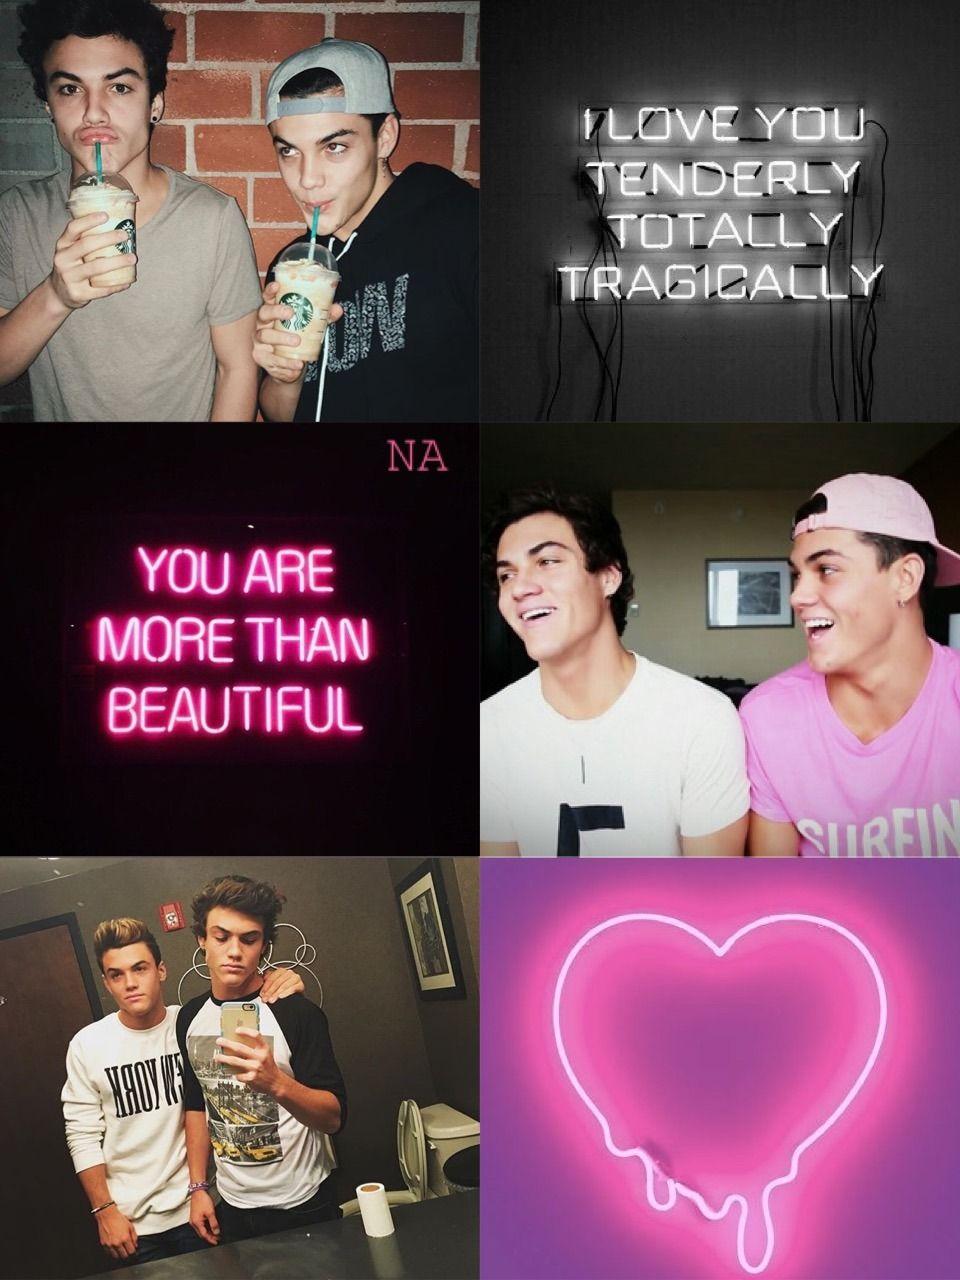 Dolan Twins Wallpapers - Wallpaper Cave